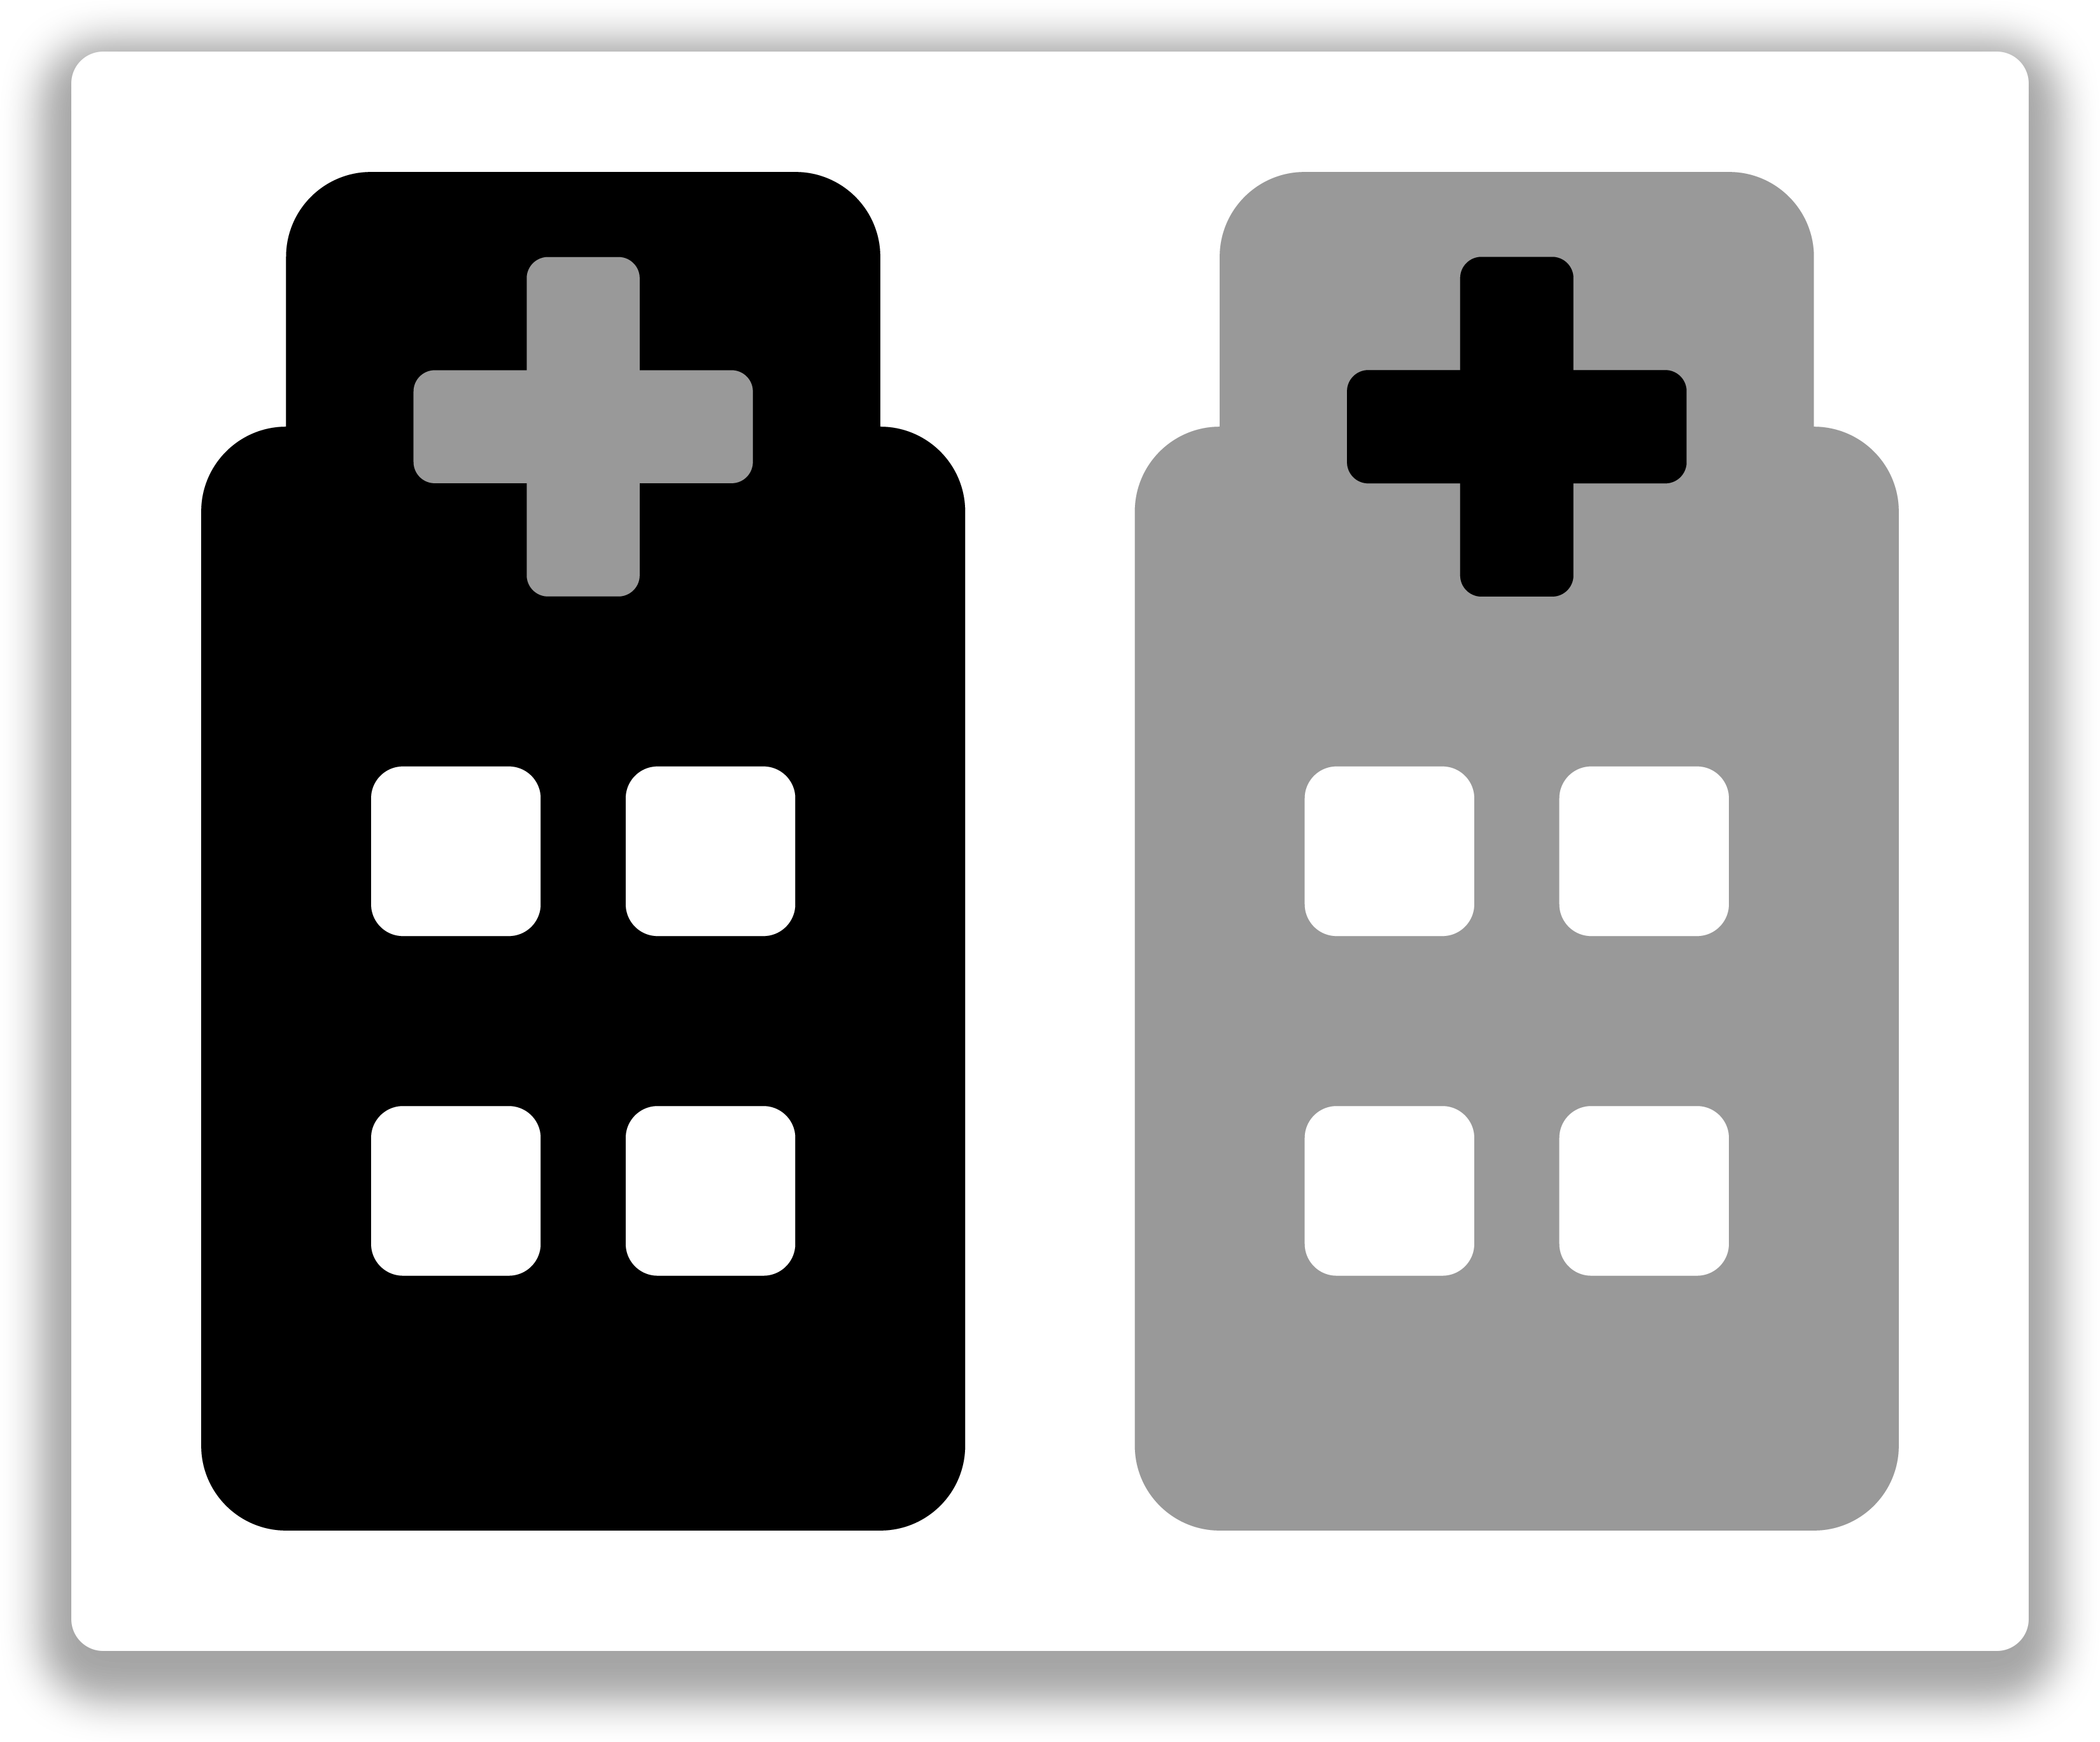 Graphic of two hospitals side-by-side